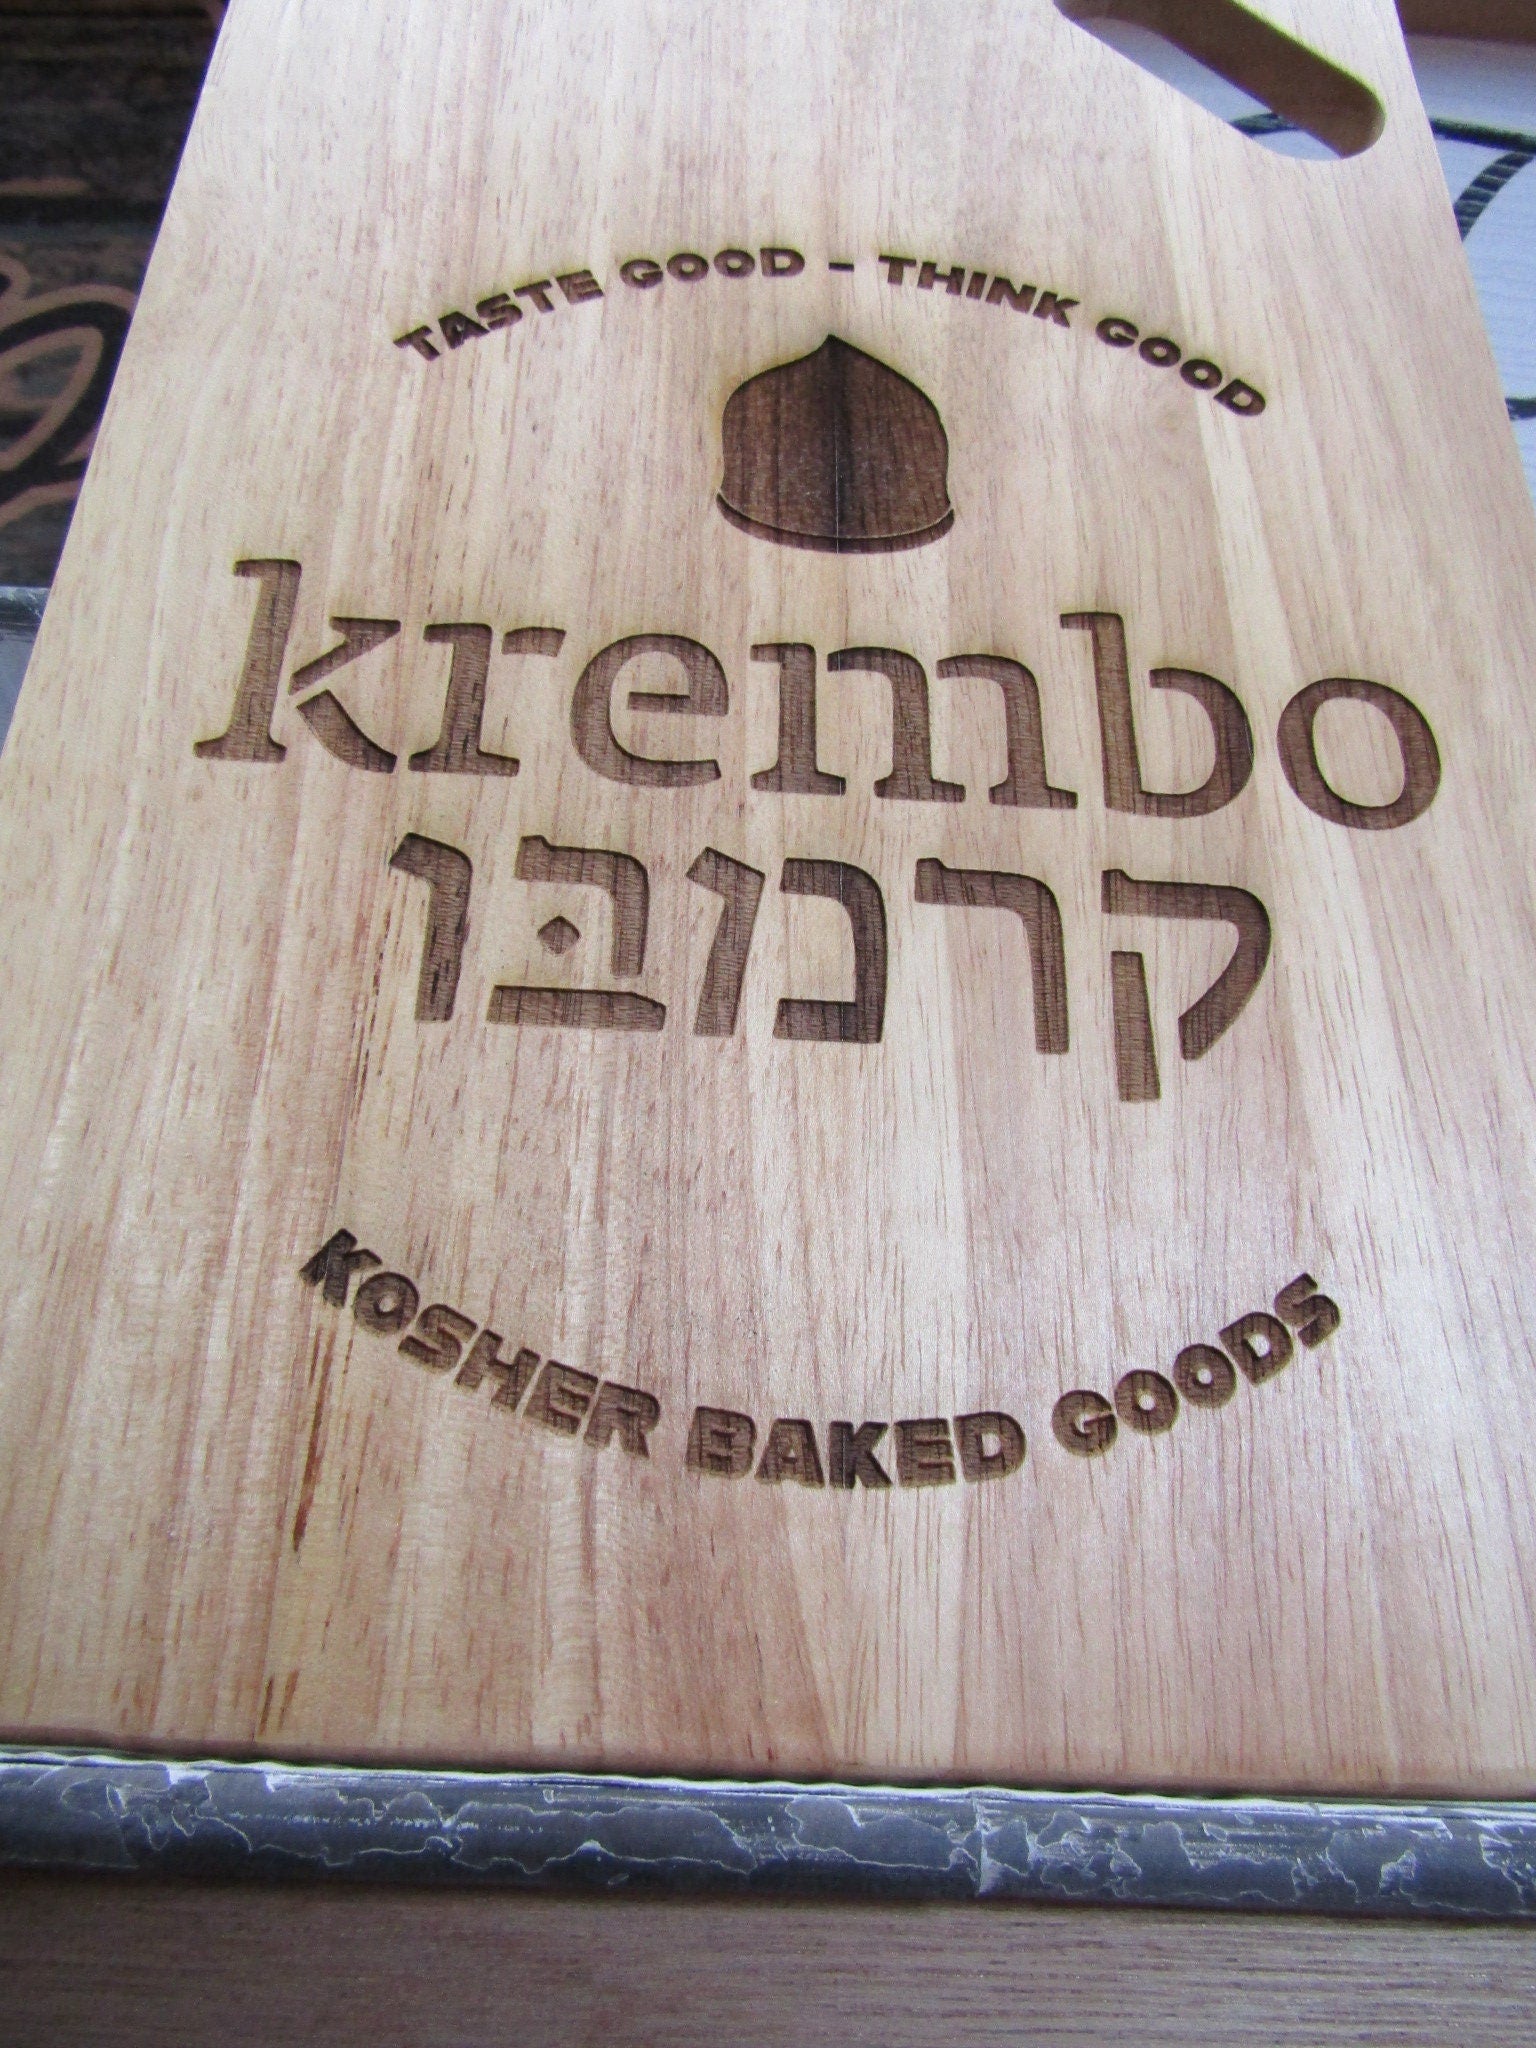 Custom Wooden Engraved Cutting Board Kosher Baked Goods Good Taste Logo Your Image Business Personalized Bamboo Bakery Etched